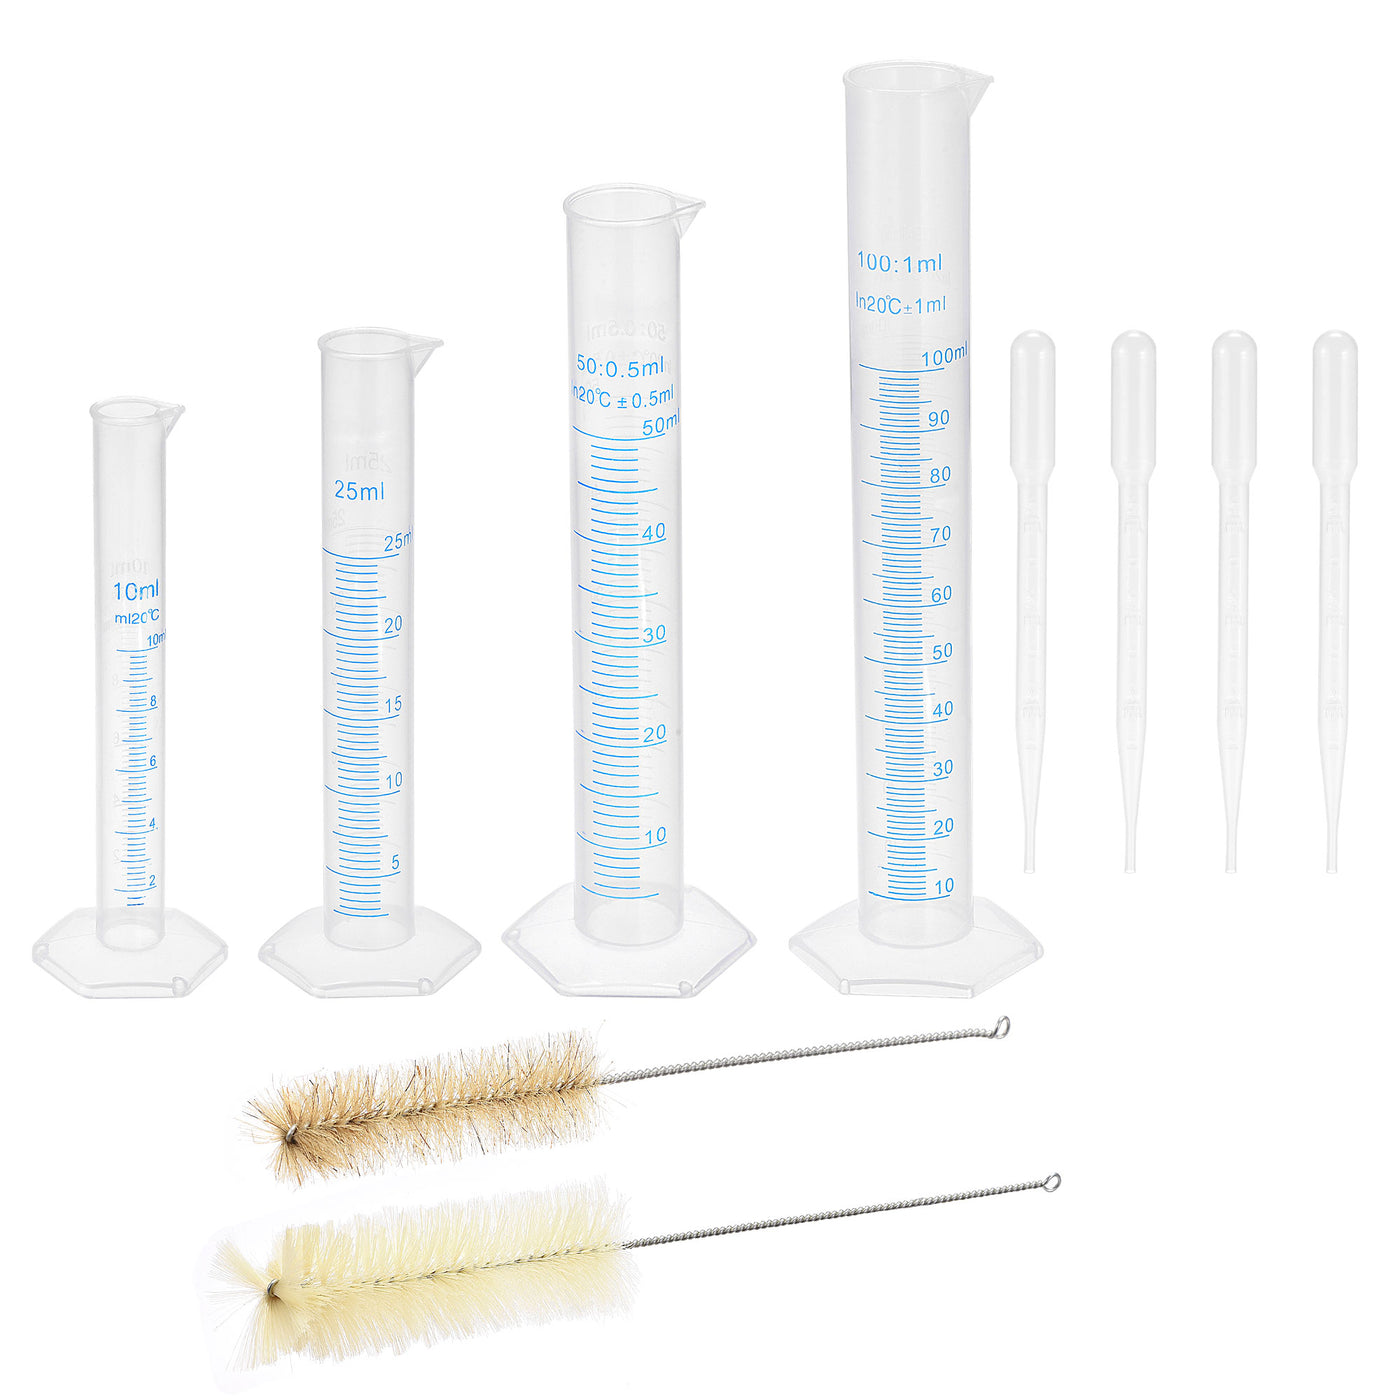 uxcell Uxcell Plastic Graduated Cylinder, 10ml 25ml 50ml 100ml Measuring Cylinder with 4 Transfer Pipettes and 2 Brushes, 10in1 Set for Science Lab